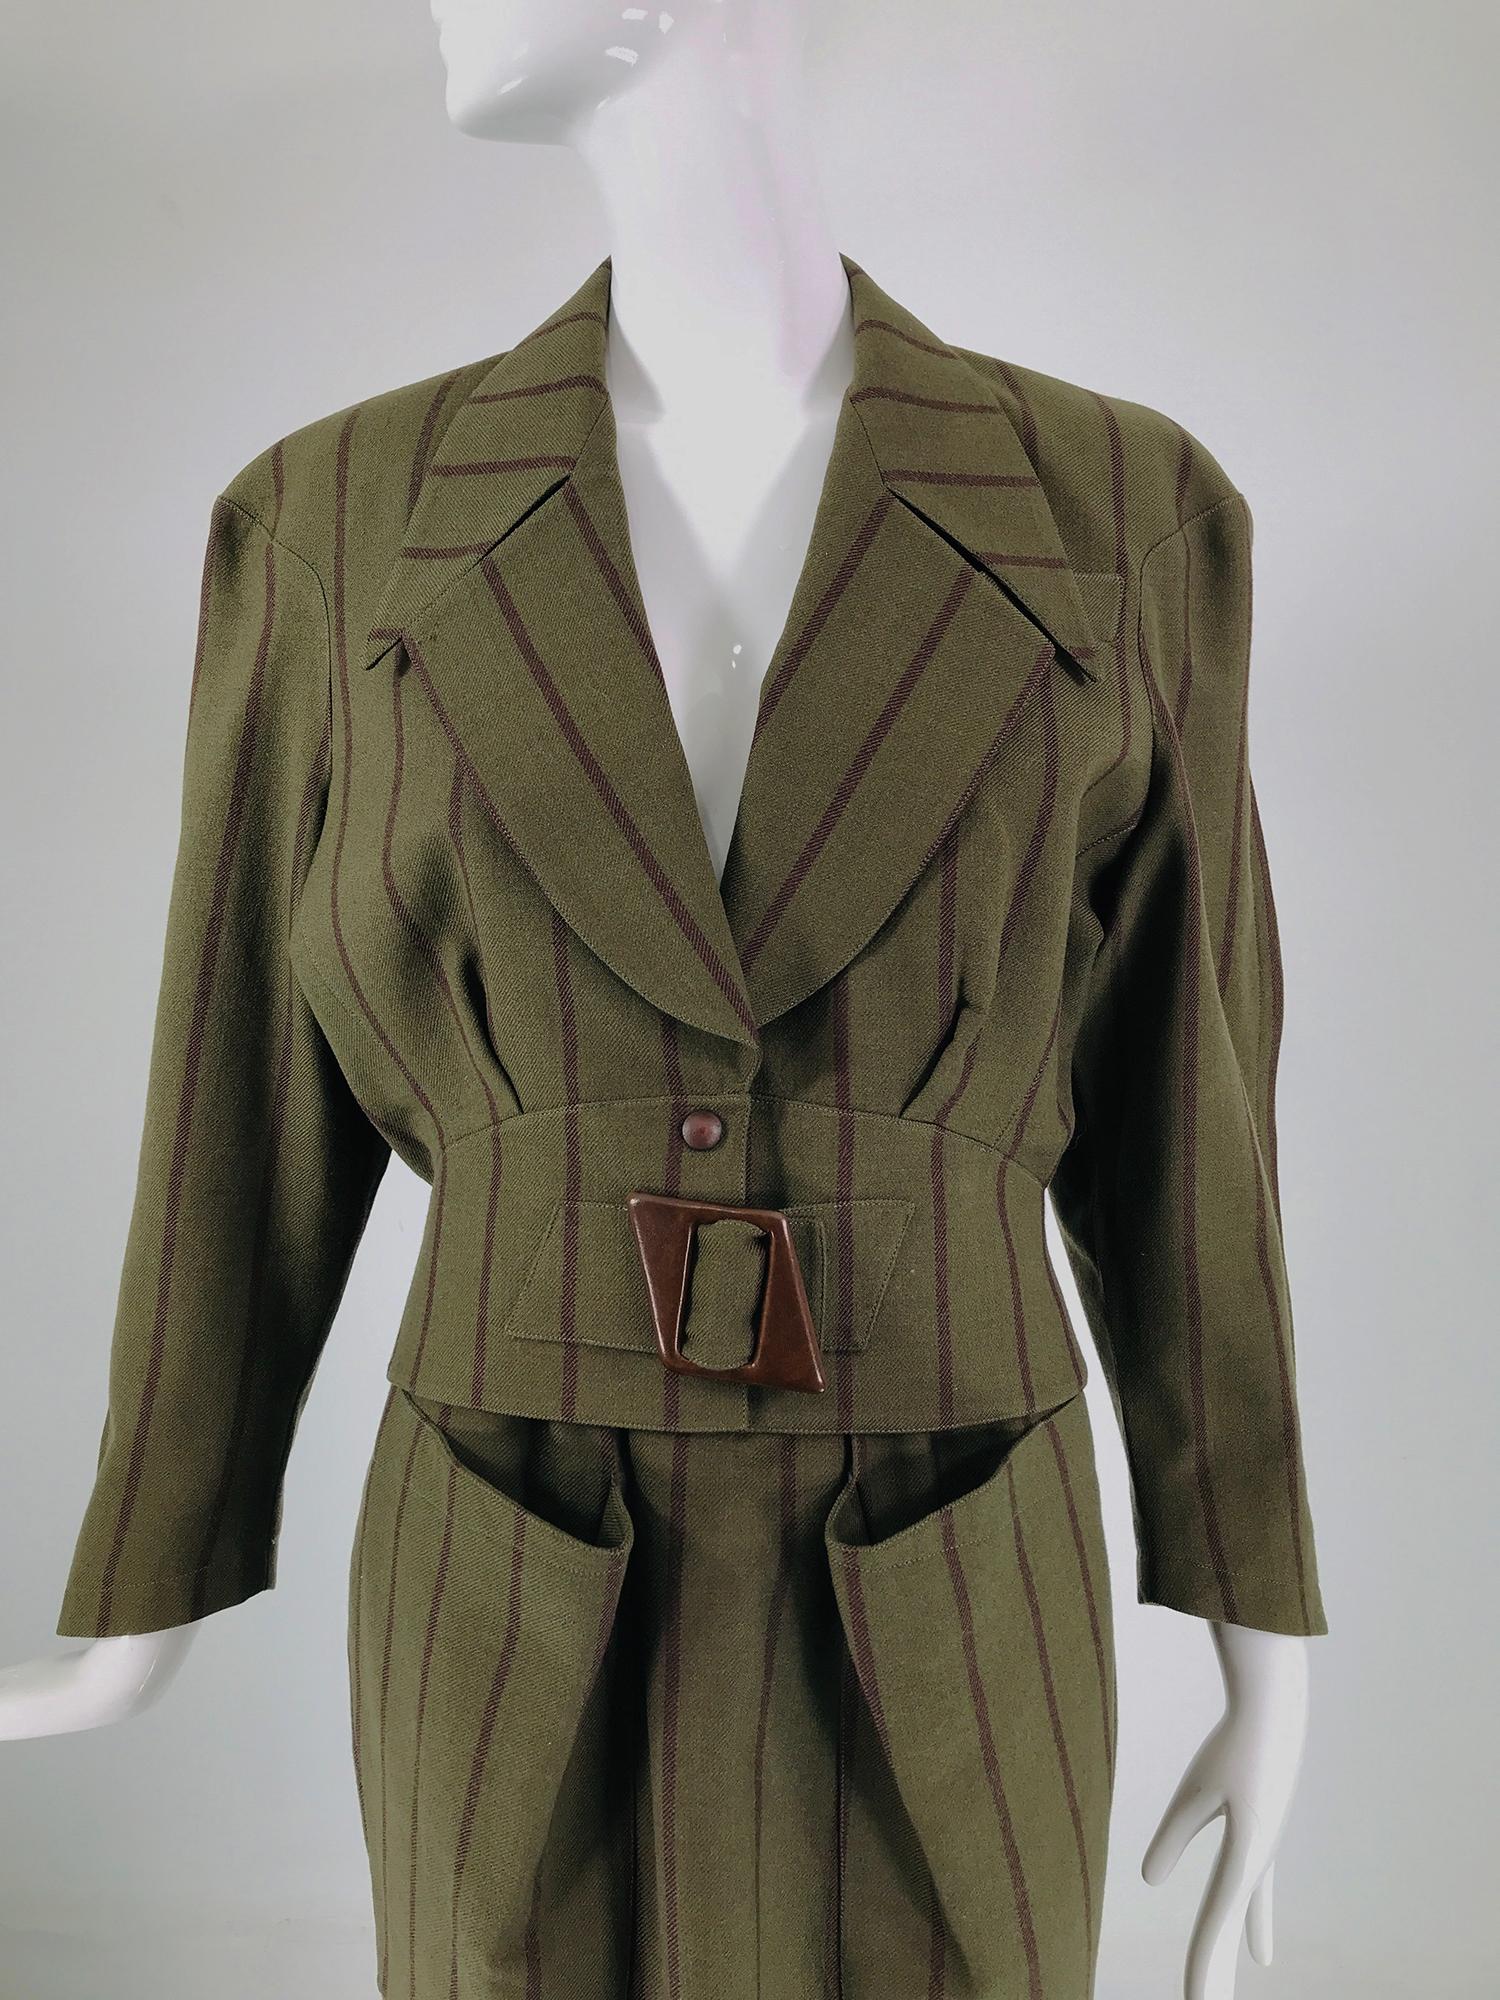 Thierry Mugler 1980s Green & brown stripe nip waist, big shoulder jacket and high waist snap back pencil skirt. The jacket has wide shoulders, the sleeves are set in with curved seams. Exaggerated shoulders taper to a wide high fitted waist, the